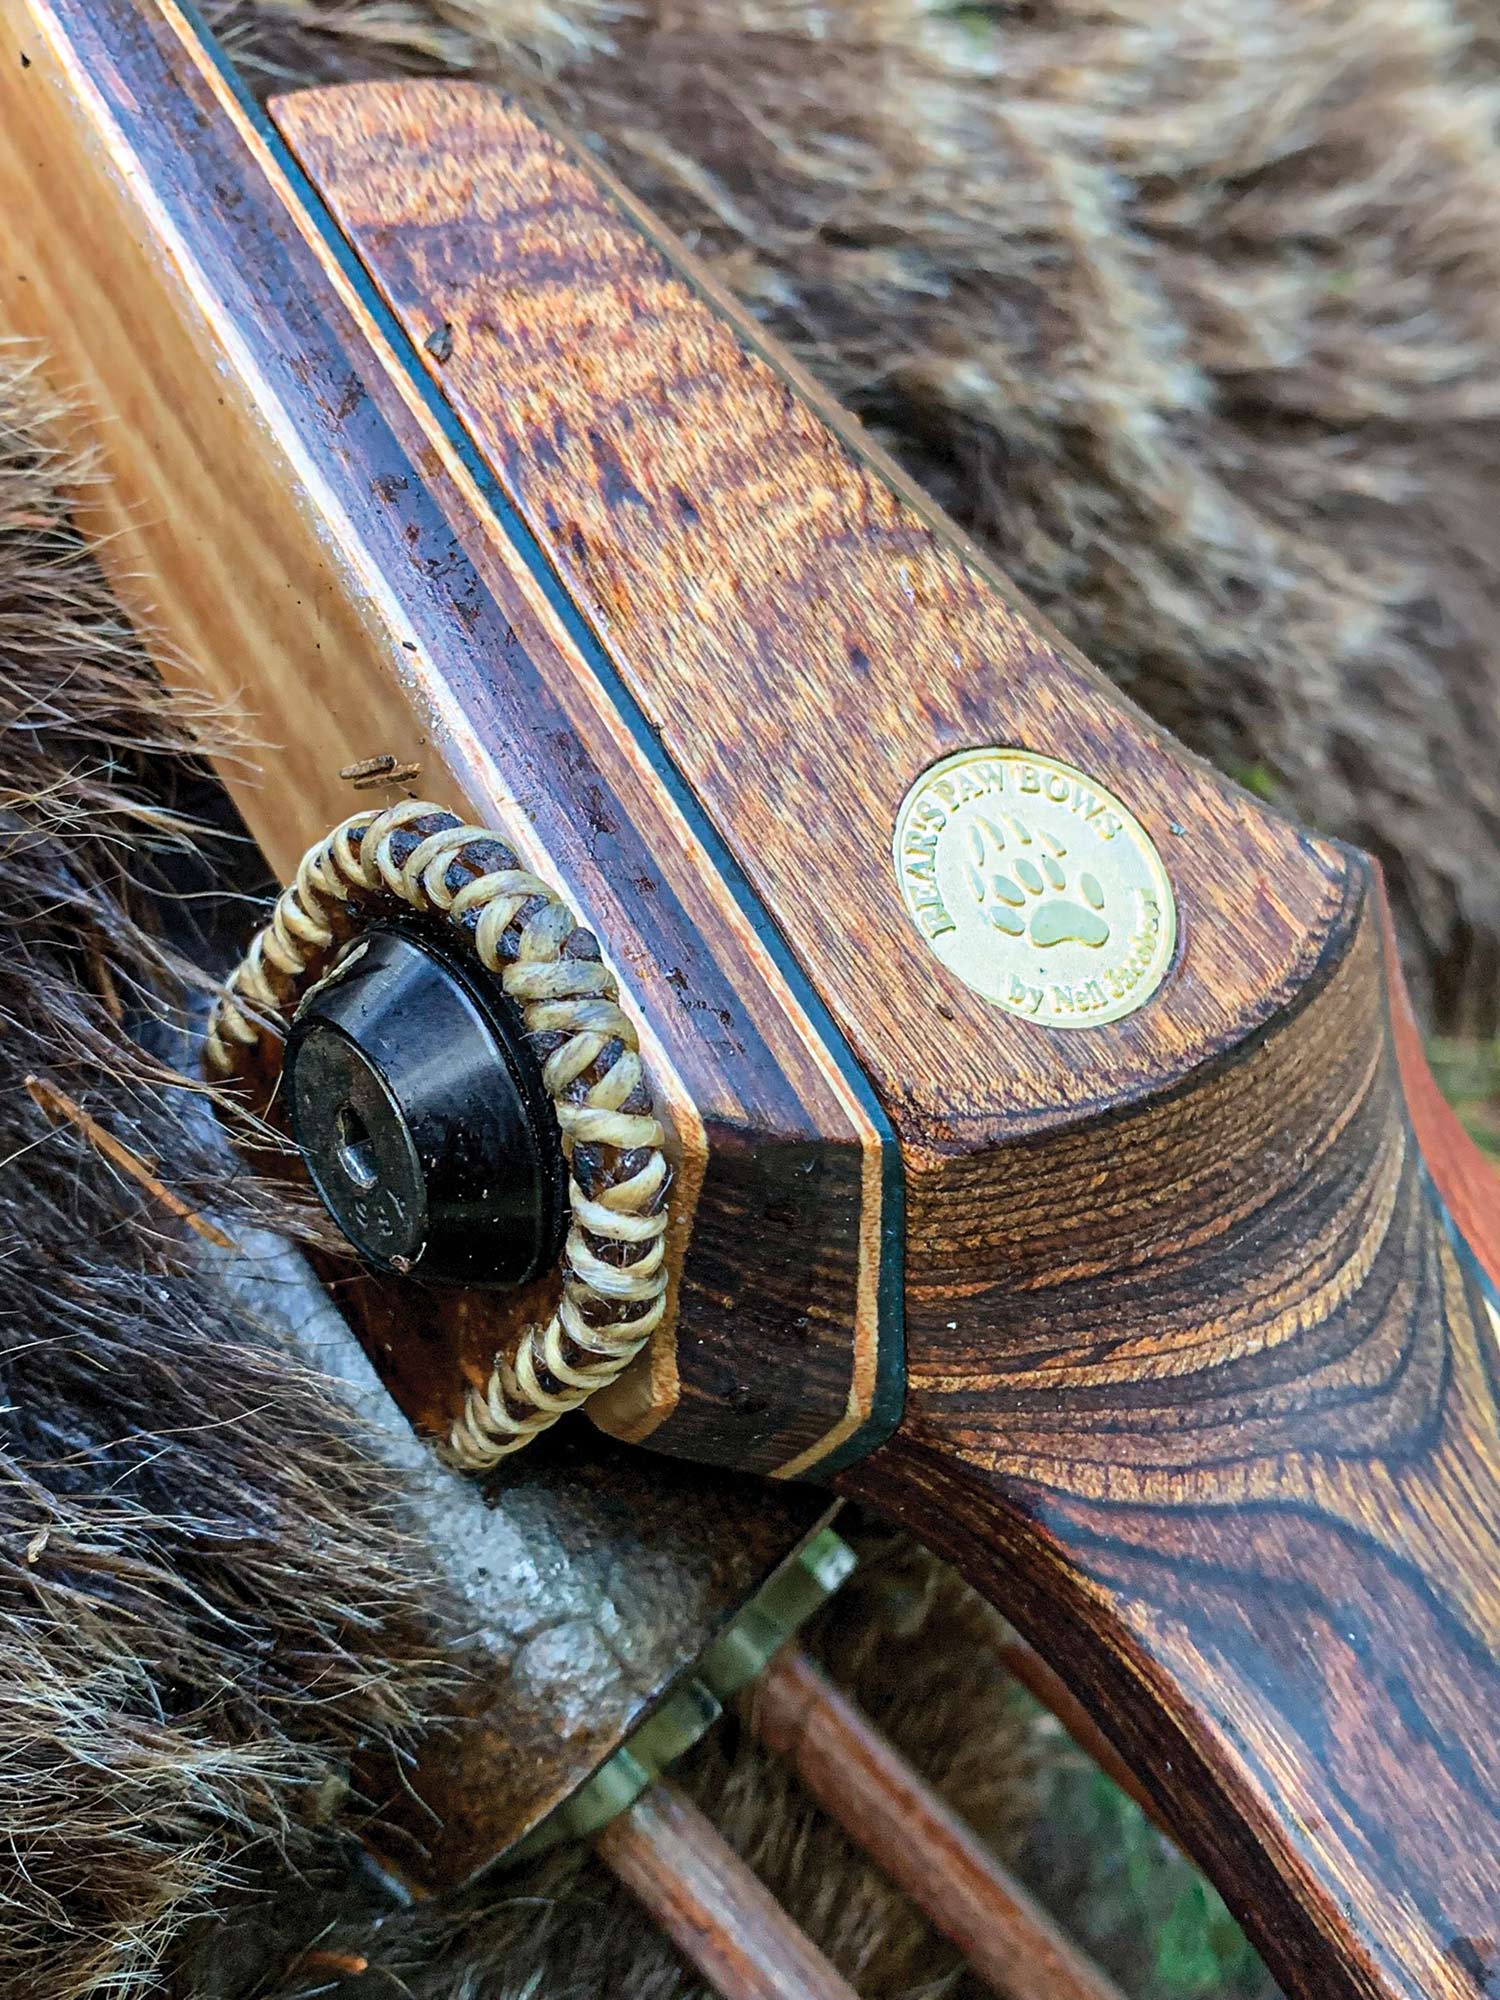 close-up of longbow riser with embedded "bear's paw bows" medallion